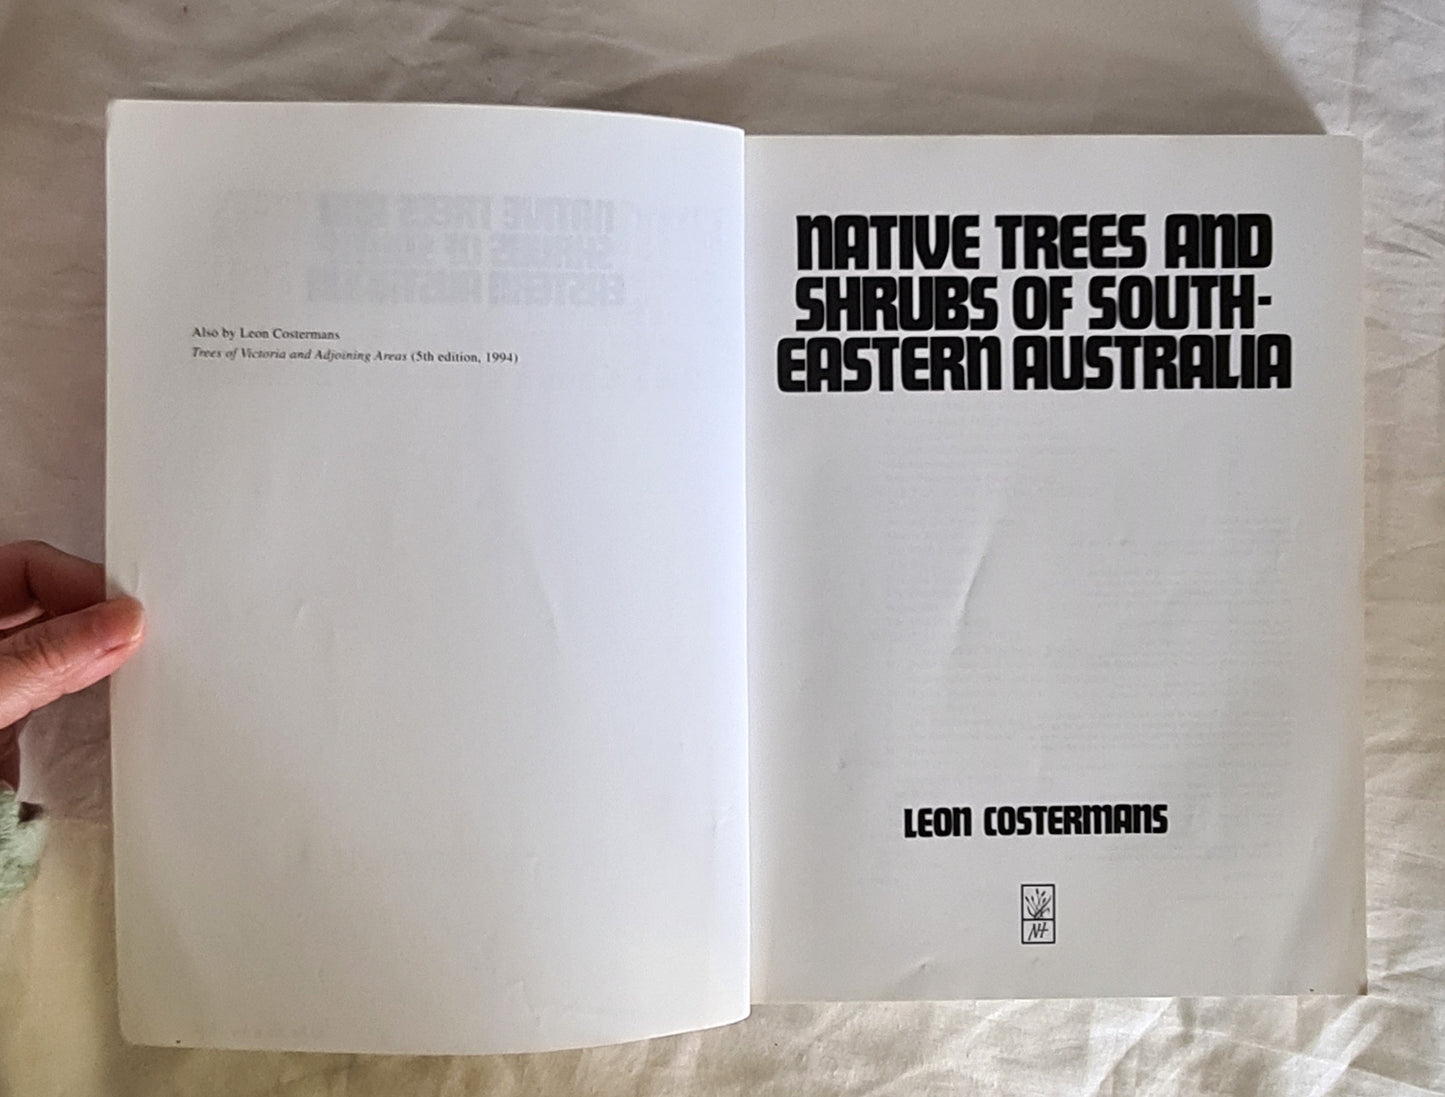 Native Trees and Shrubs of South-Eastern Australia by Leon Costermans